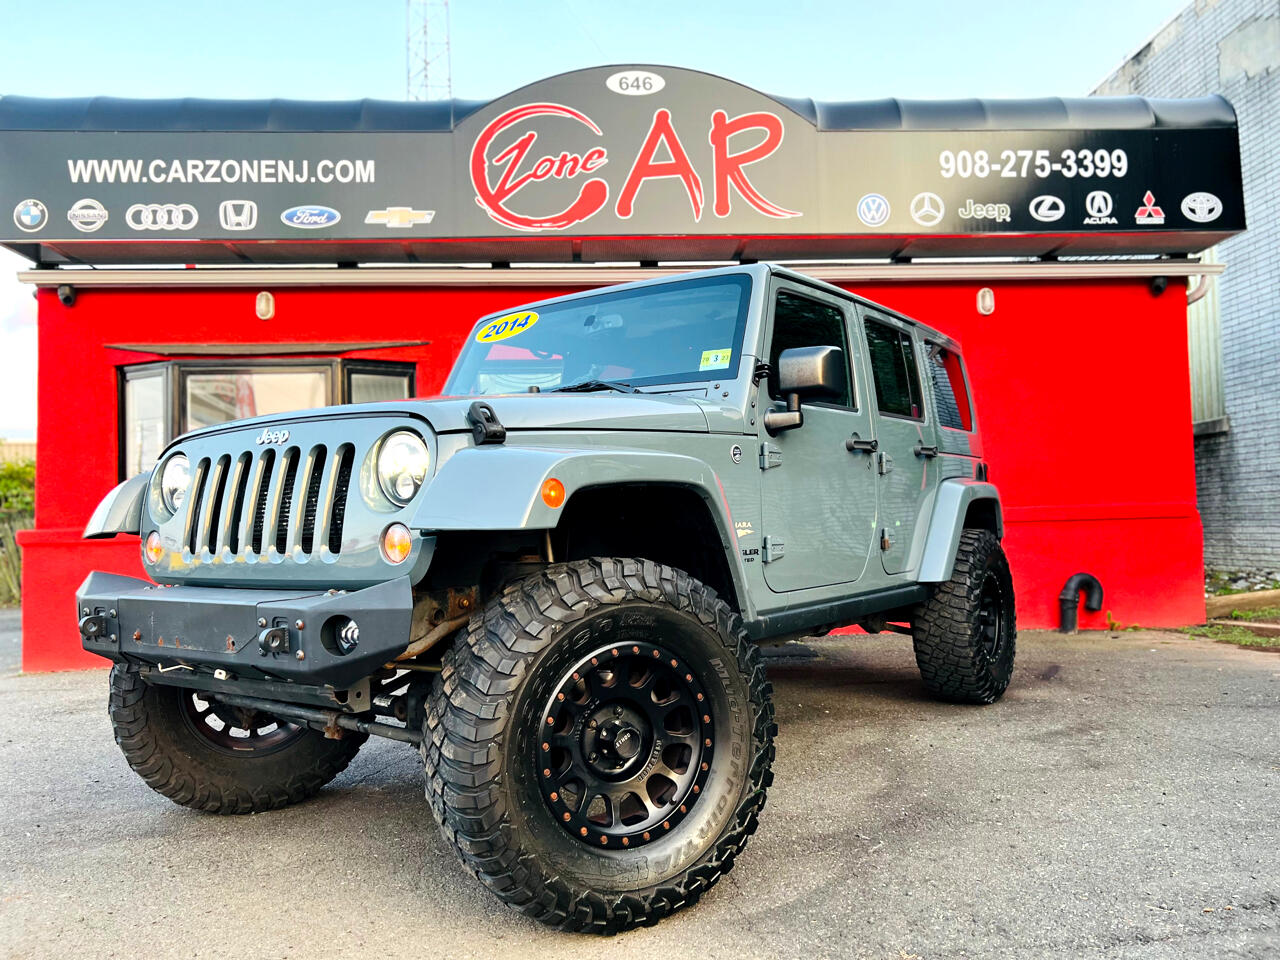 Buy Here Pay Here 2014 Jeep Wrangler Unlimited Sahara 4WD for Sale in  Linden NJ 07036 Car Zone